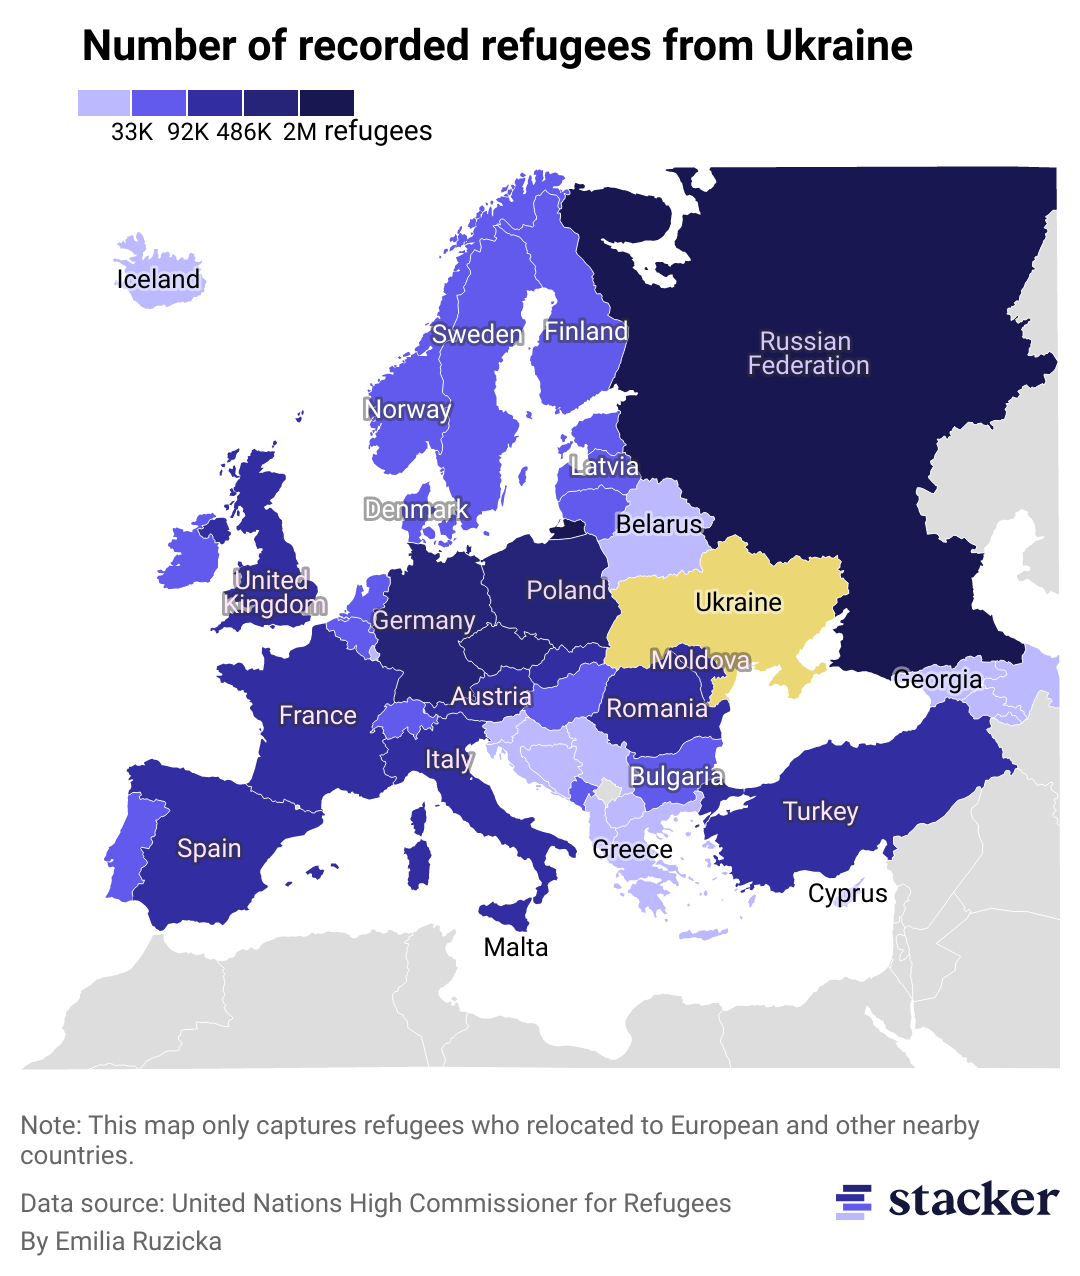 A map showing how many refugees from Ukraine have registered for Temporary Protection or similar national protection schemes in Europe since February 2022.